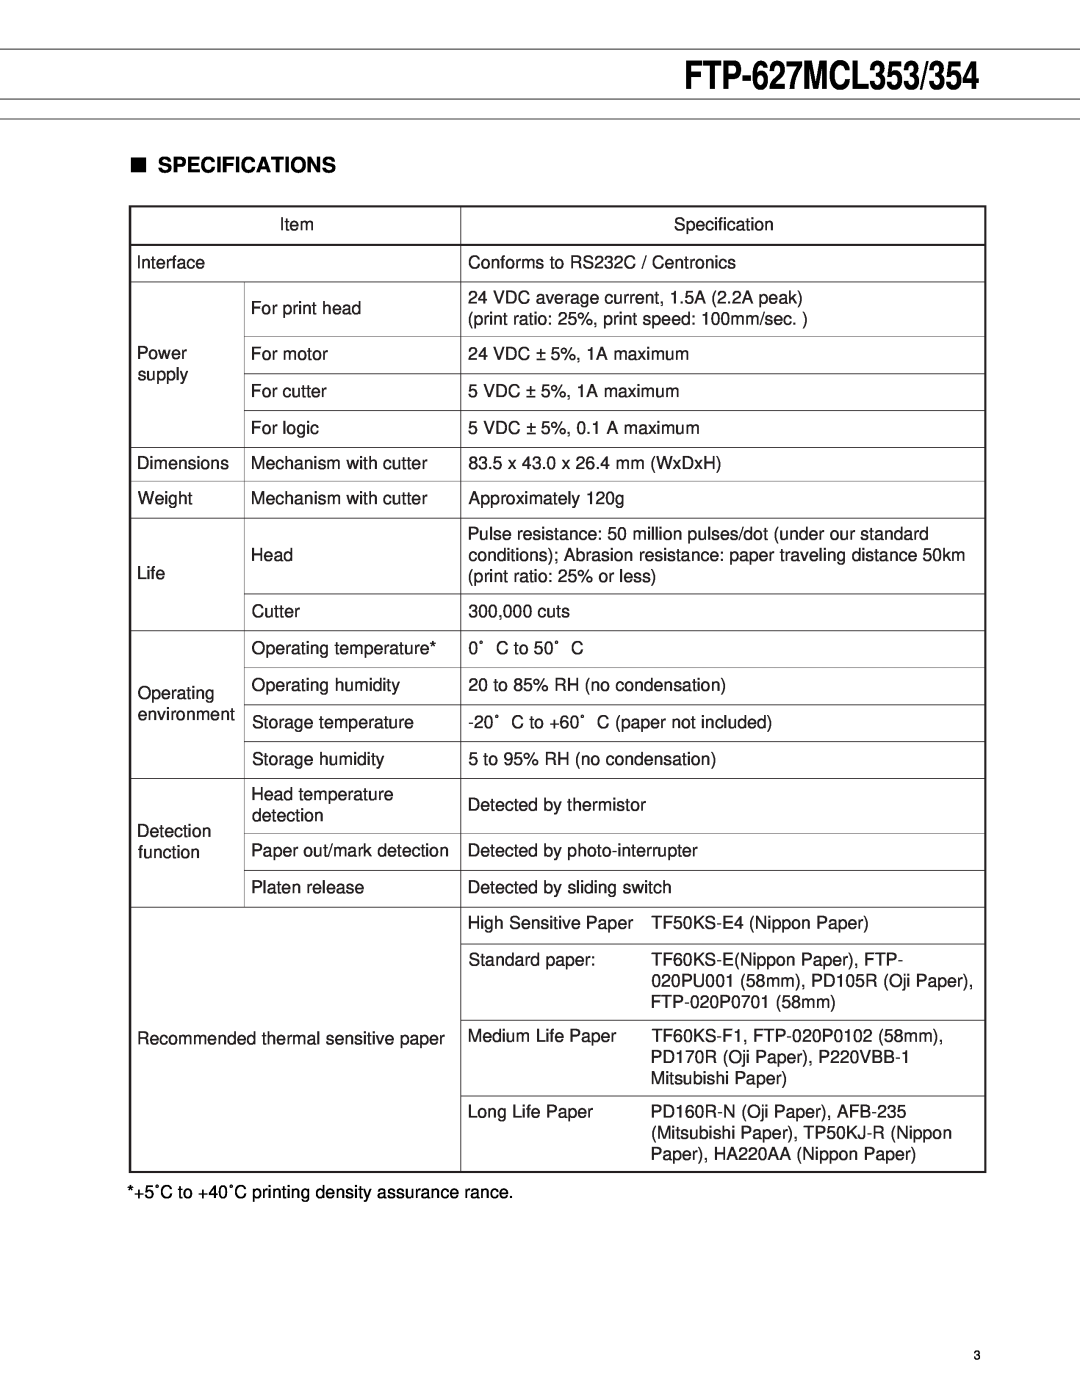 Fujitsu FTP-627MCL354 manual FTP-627MCL353/354, Specifications 